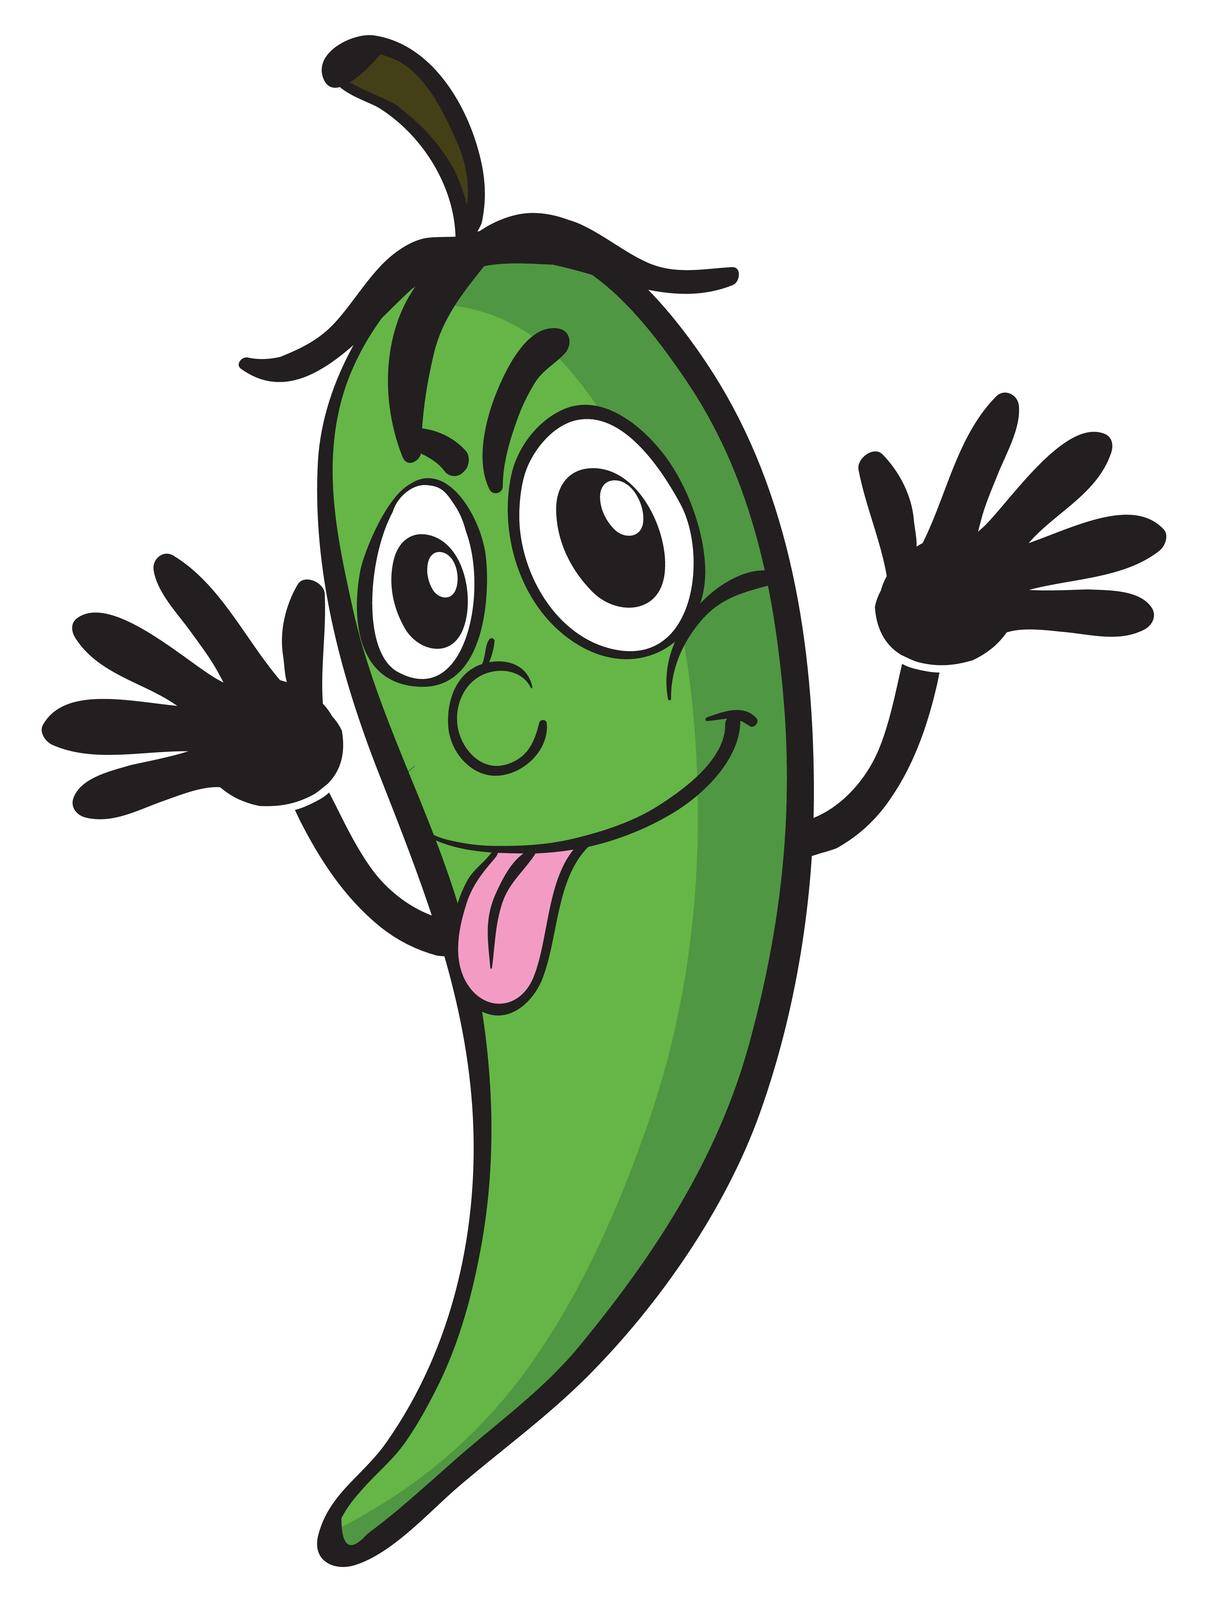 illustration of a green chili on a white background